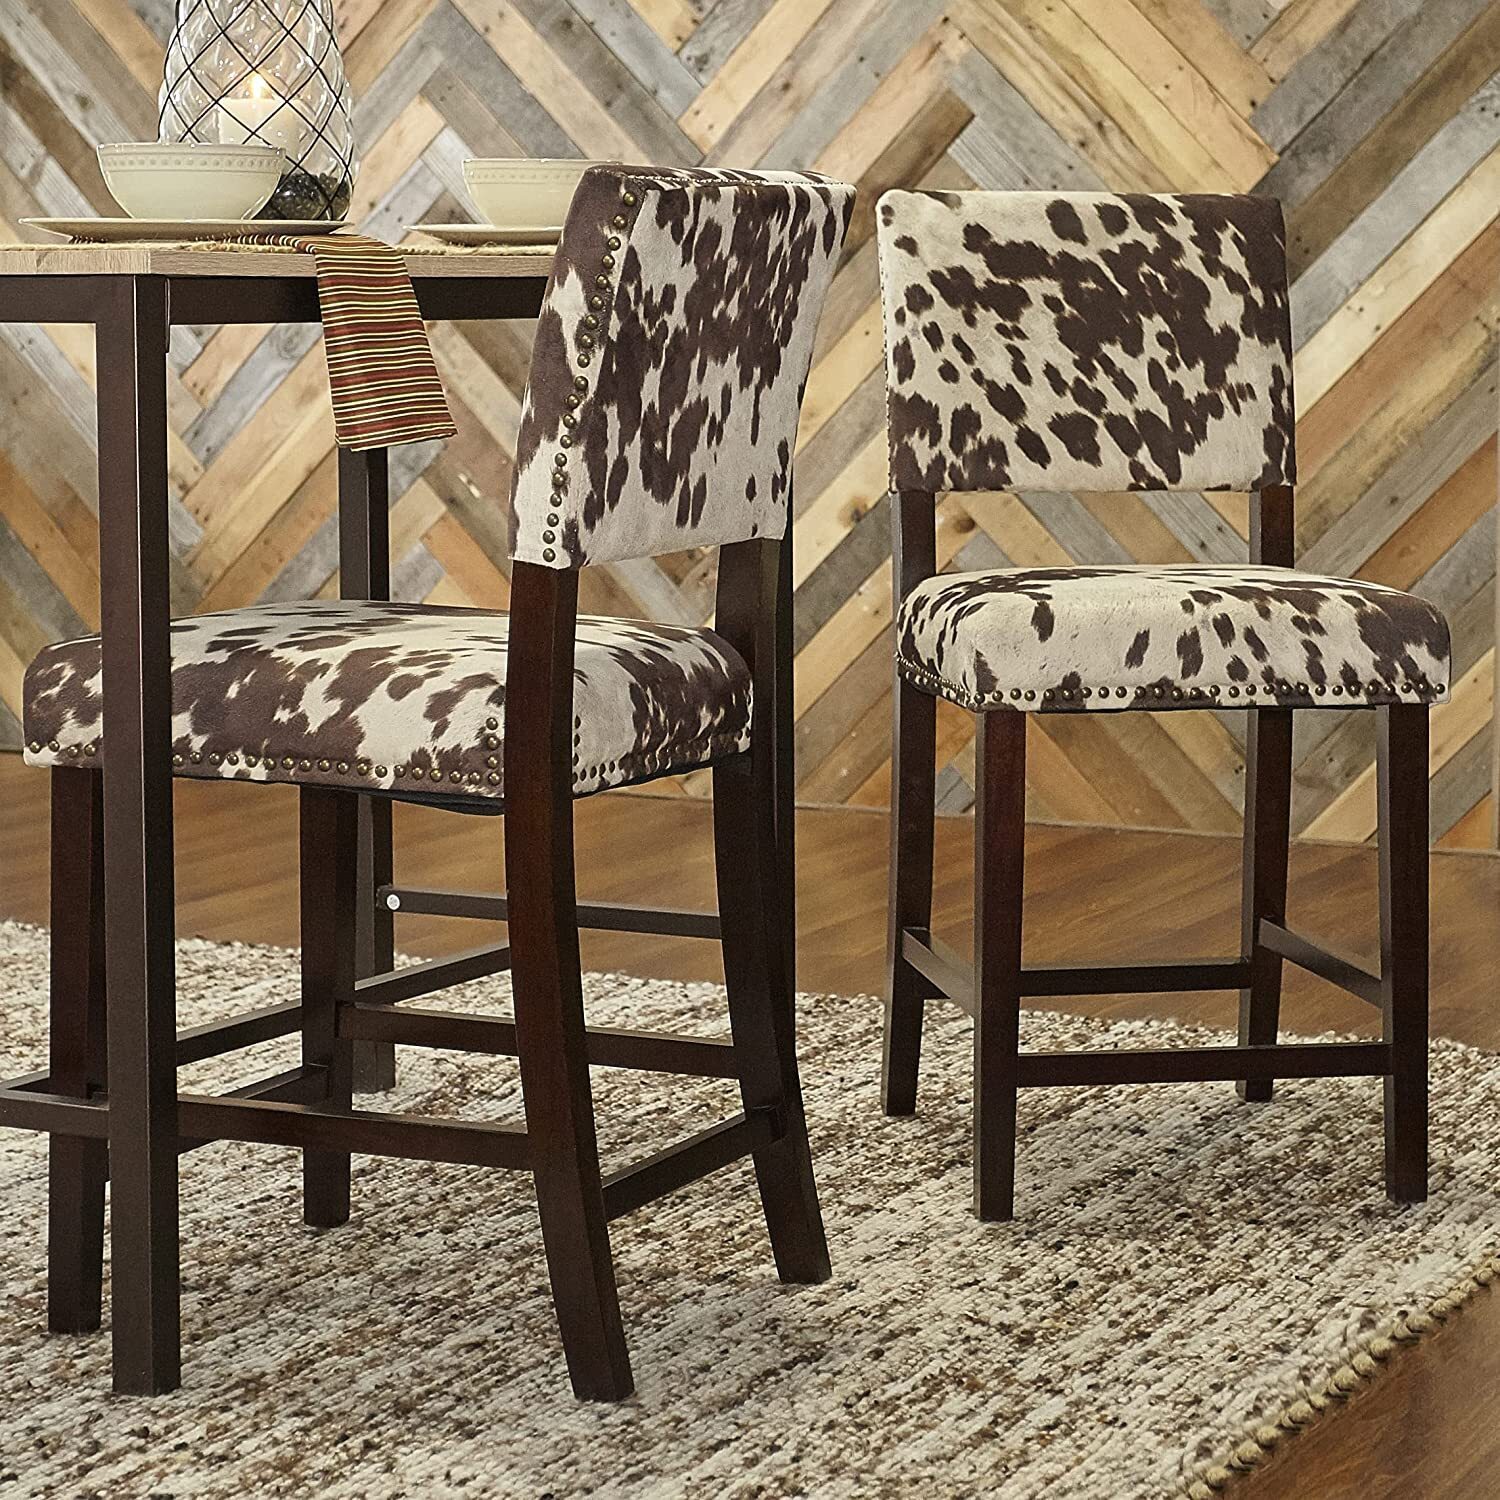 Animal print dining chairs in a counter height